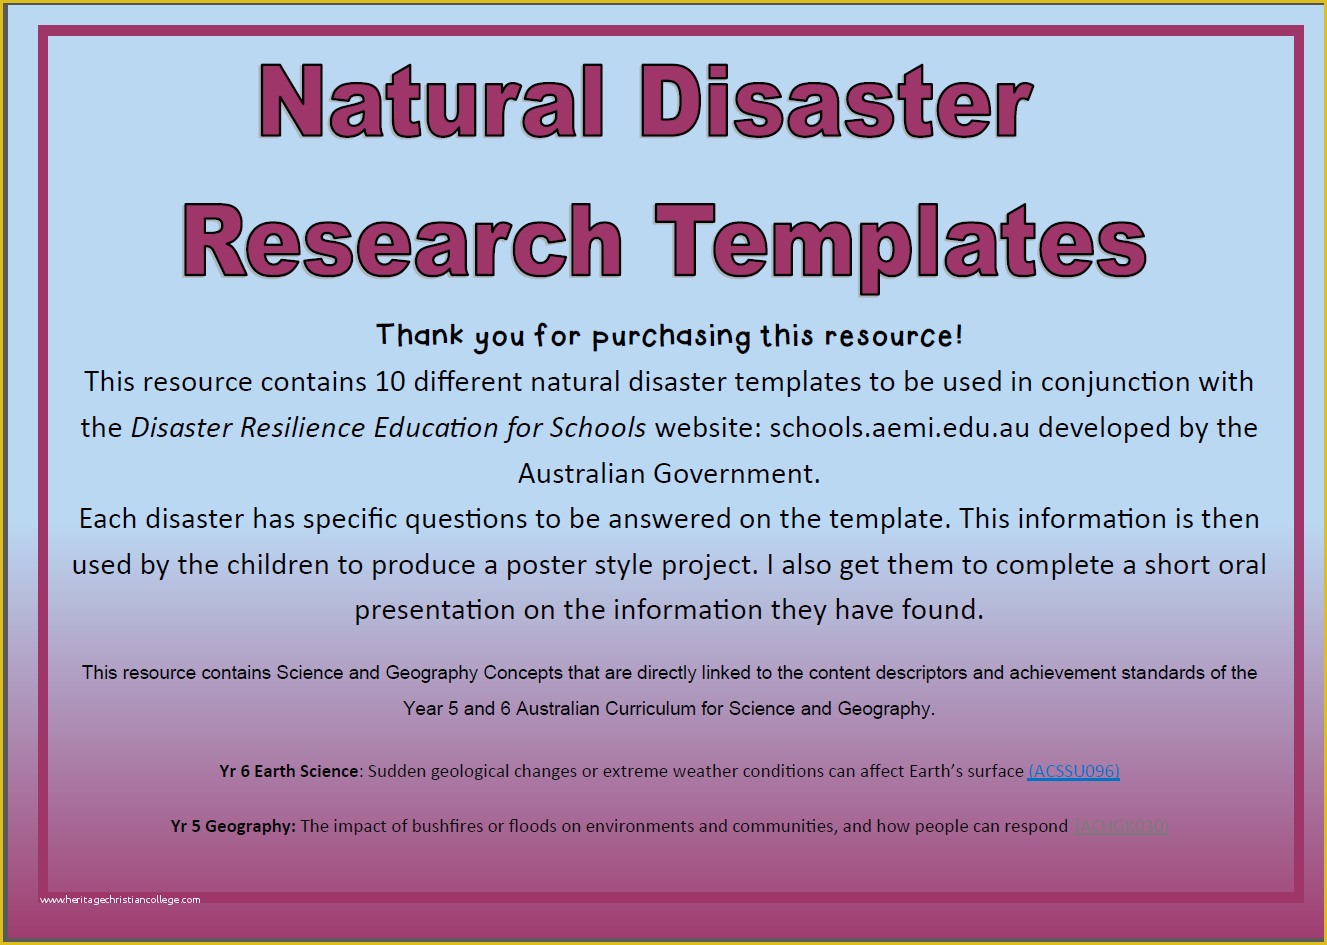 Natural Disaster Powerpoint Templates Free Of Natural Disaster Research Templates